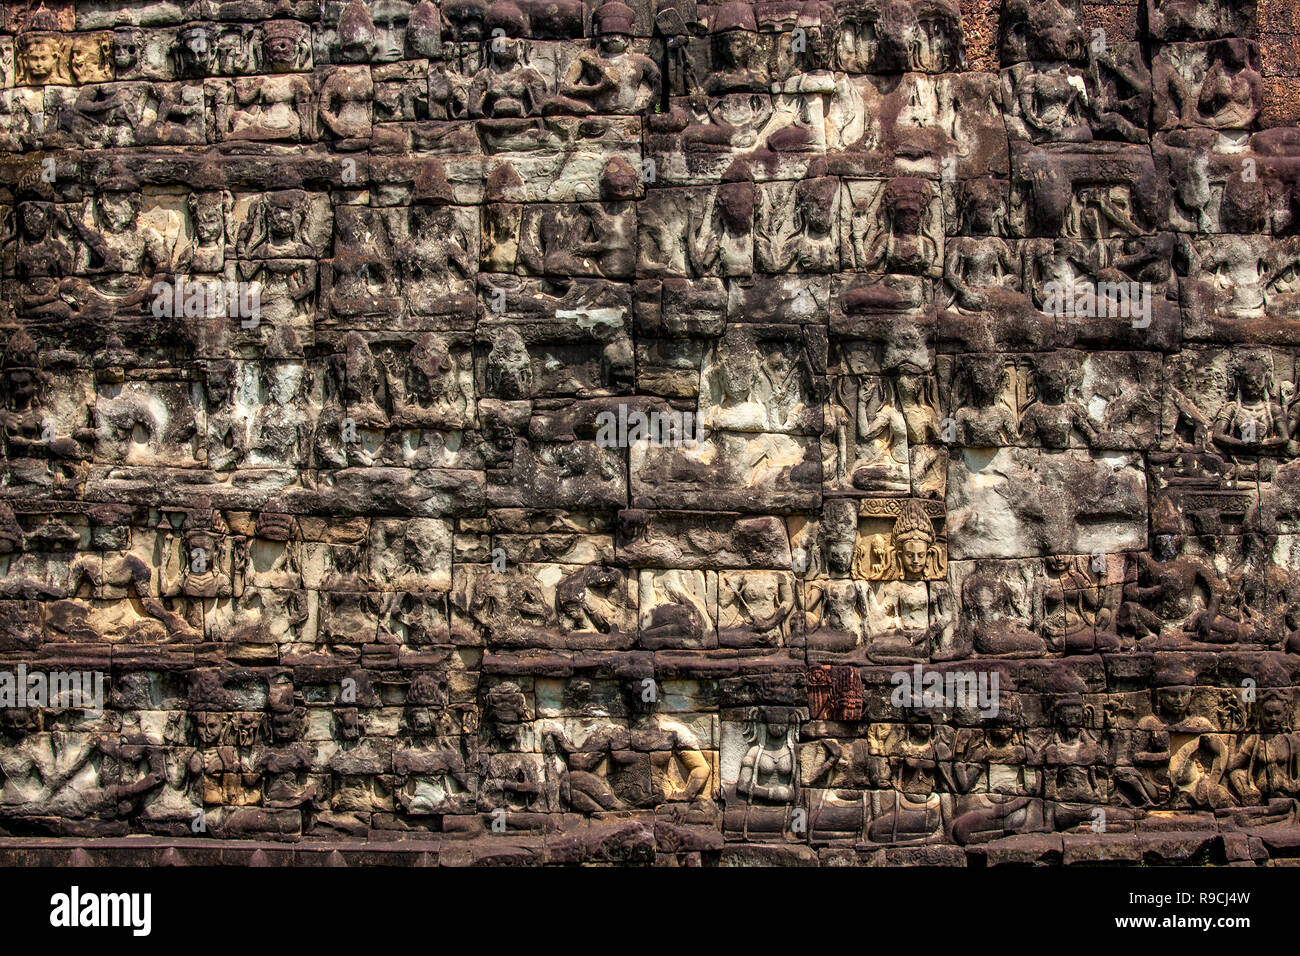 Bas-relief sandstone carvings at the Elephant Terrace Leper King Buddhist ruins at Angkor Thom temple complex in Siem Reap, Cambodia. Stock Photo